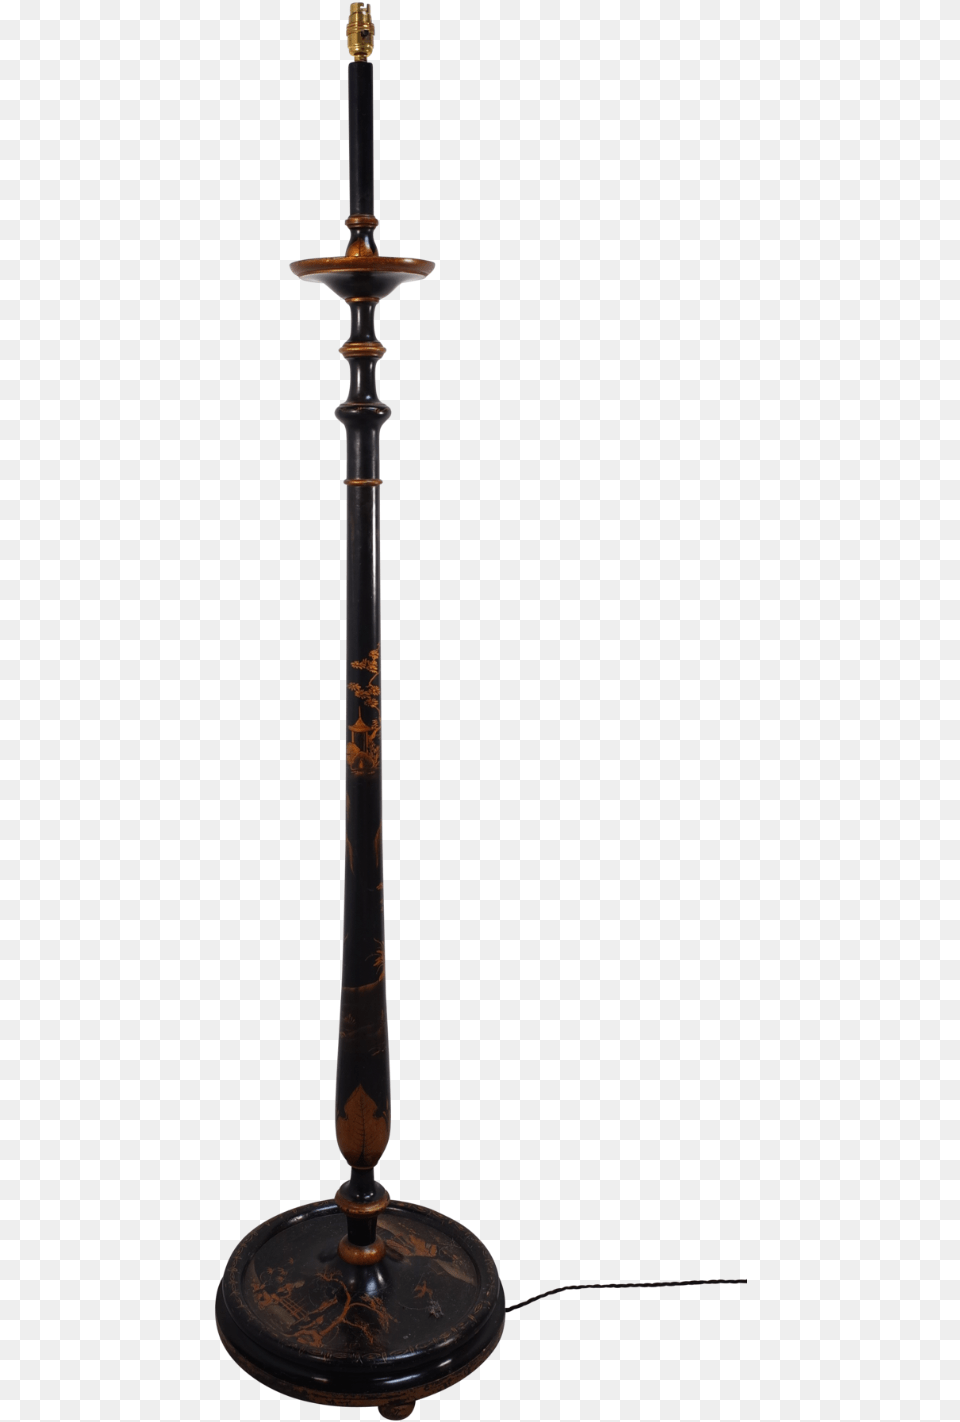 Chinoiserie Lacquered Floor Lamp Indian Musical Instruments, Candle, Mace Club, Weapon, Candlestick Free Png